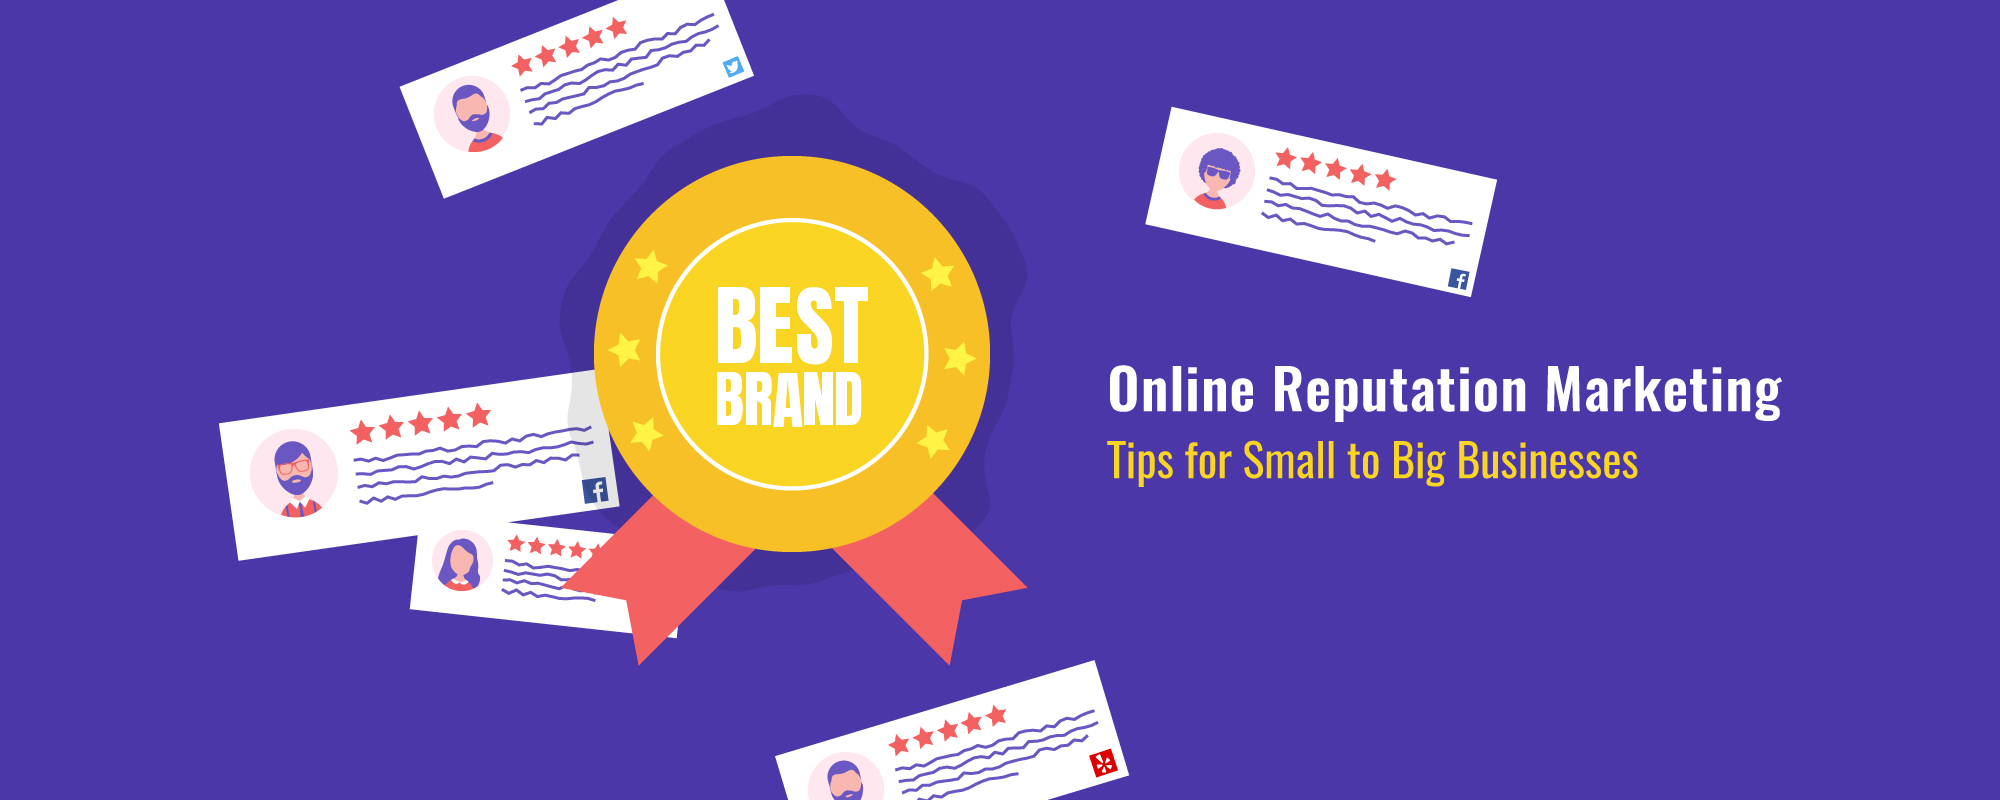 Reputation Marketing Tips For Small & Local Businesses, Professionals, Big Brands